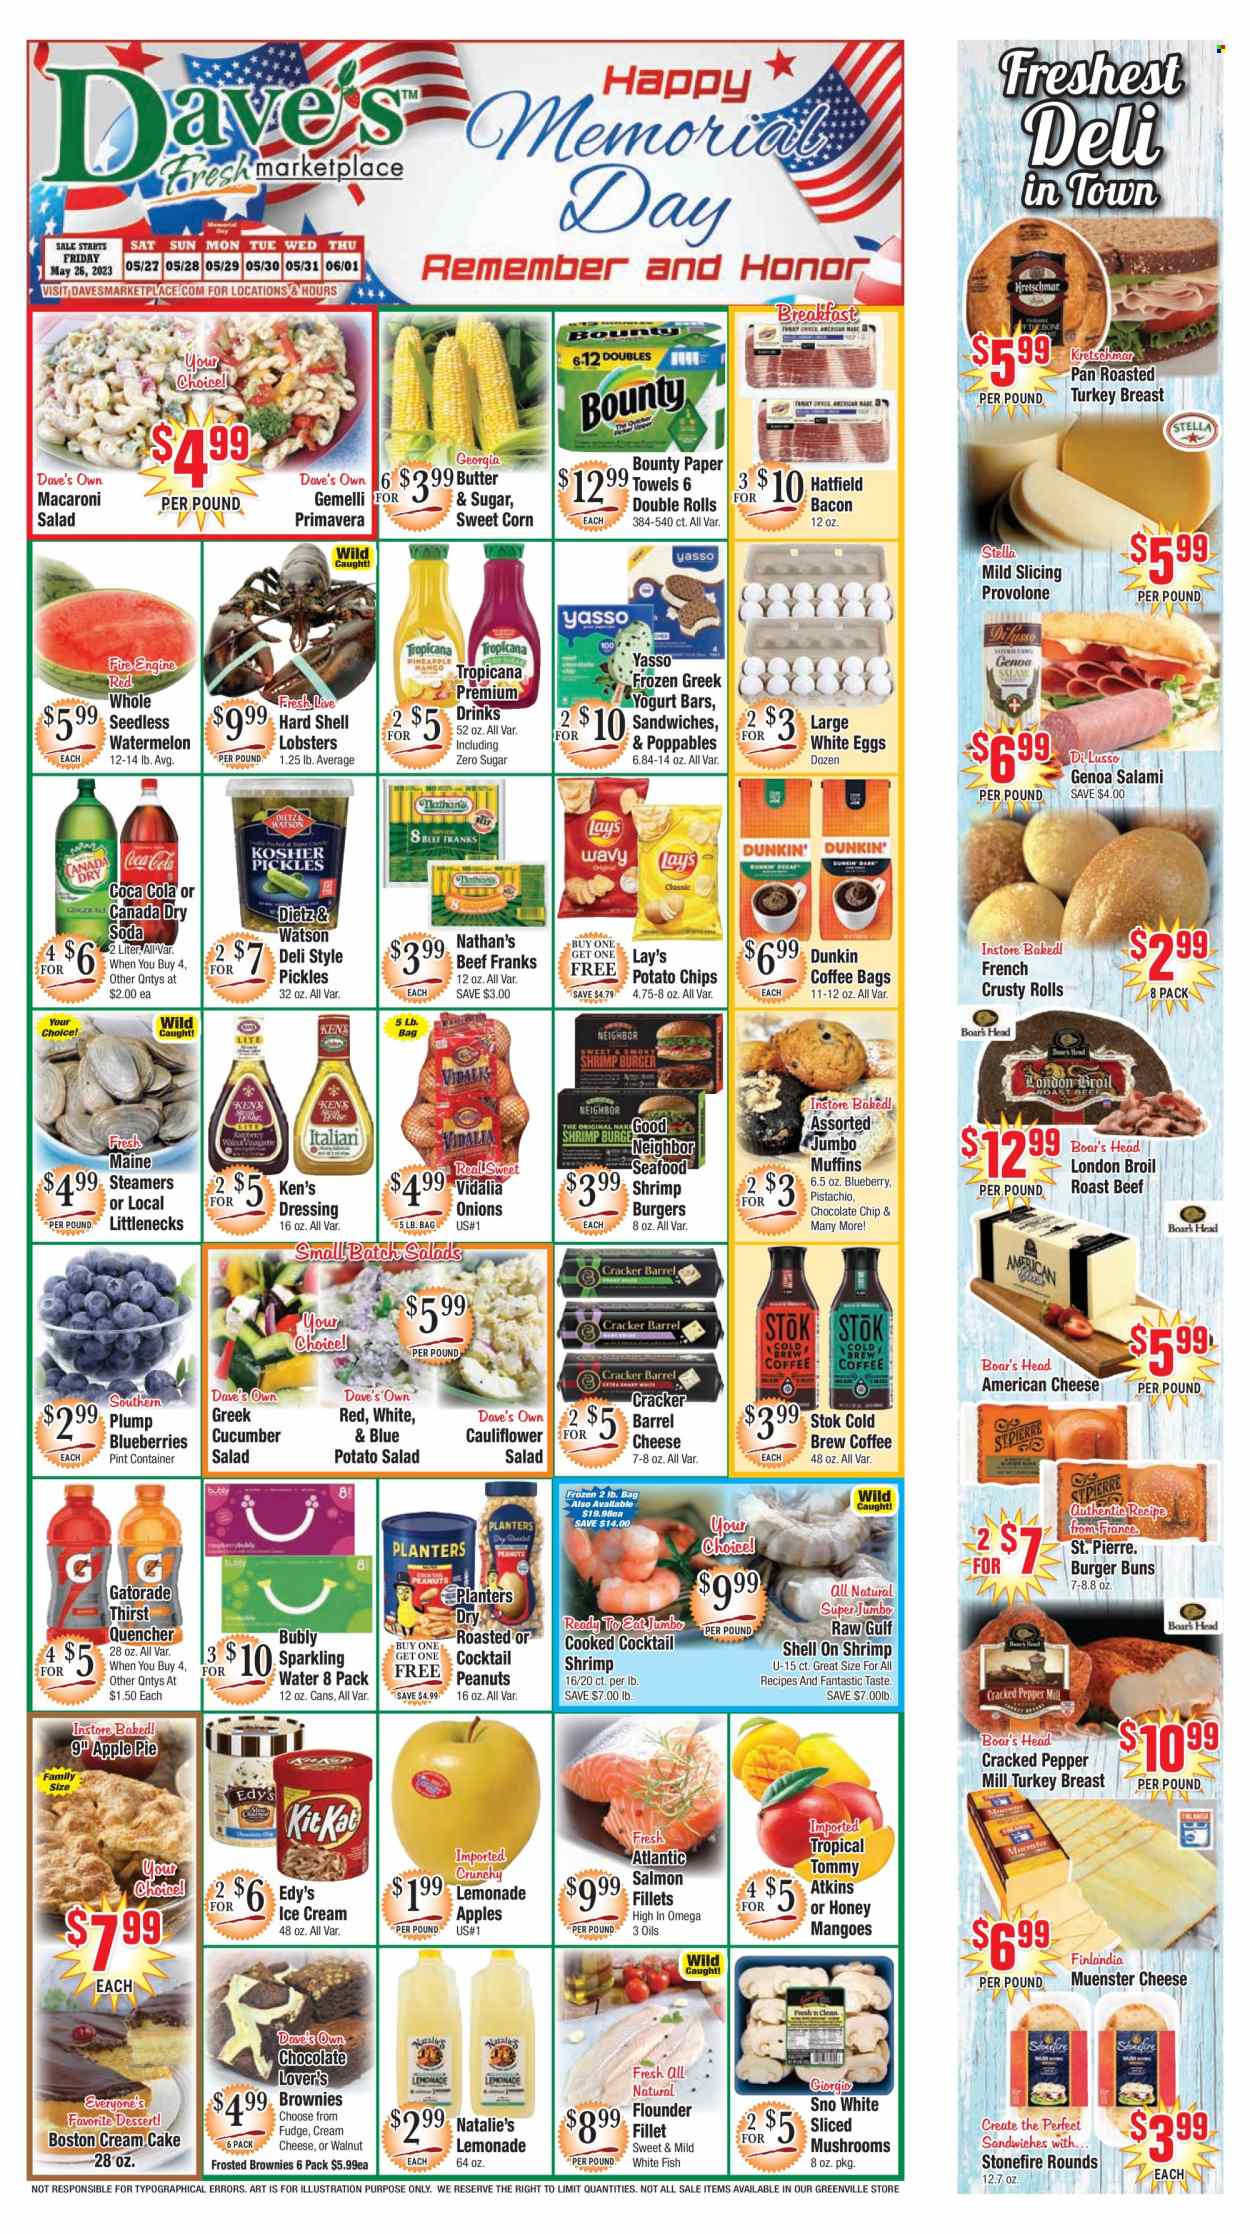 thumbnail - Dave's Fresh Marketplace Flyer - 05/26/2023 - 06/01/2023 - Sales products - mushrooms, cake, buns, burger buns, apple pie, brownies, muffin, dessert, corn, onion, blueberries, flounder, lobster, salmon, salmon fillet, whitefish, seafood, fish, shrimps, roast, Boar's Head, salami, Dietz & Watson, frankfurters, potato salad, macaroni salad, american cheese, cream cheese, cheese, Münster cheese, Provolone, greek yoghurt, eggs, ice cream, fudge, chocolate chips, Bounty, crackers, potato chips, Lay’s, pickles, dressing, peanuts, Planters, Canada Dry, lemonade, Gatorade, soda, sparkling water, water, iced coffee, beef meat, roast beef, paper, electrolyte drink. Page 1.